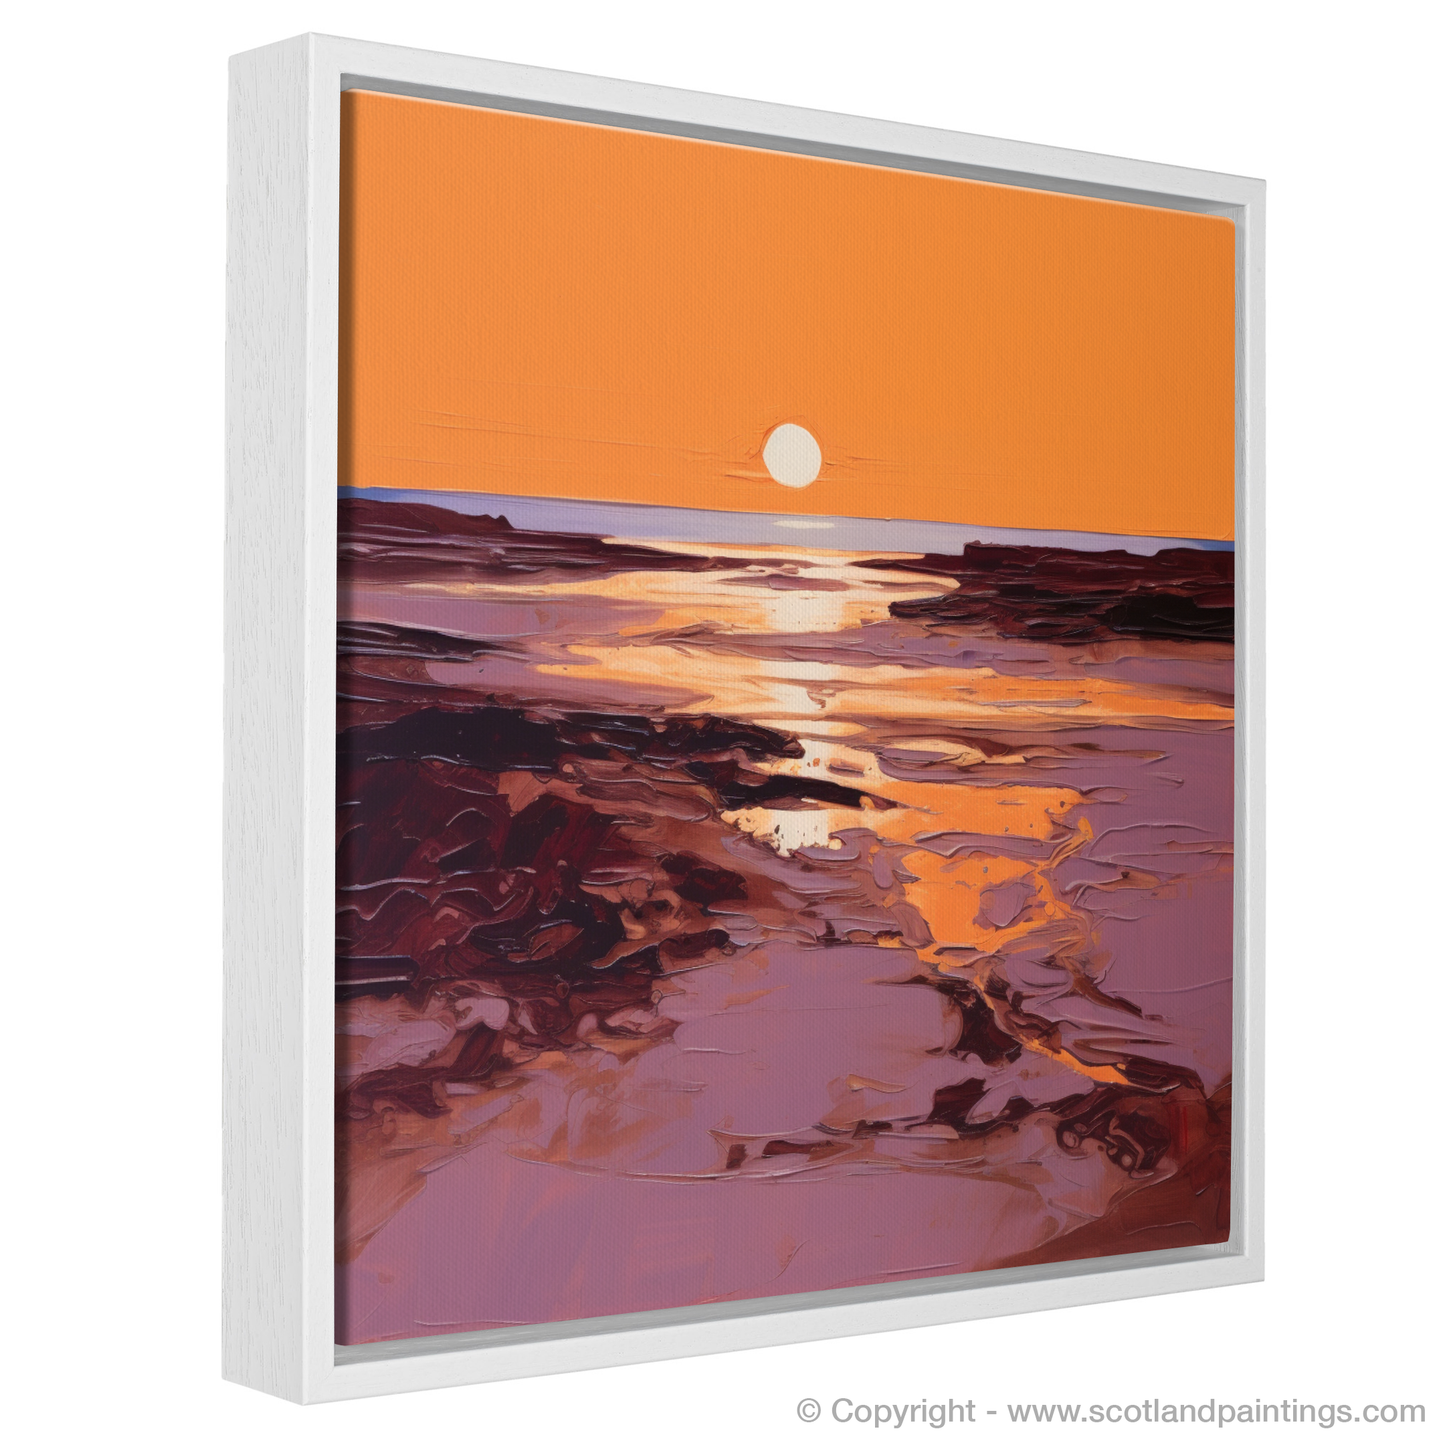 Painting and Art Print of Balmedie Beach at golden hour entitled "Golden Hour Embrace at Balmedie Beach".